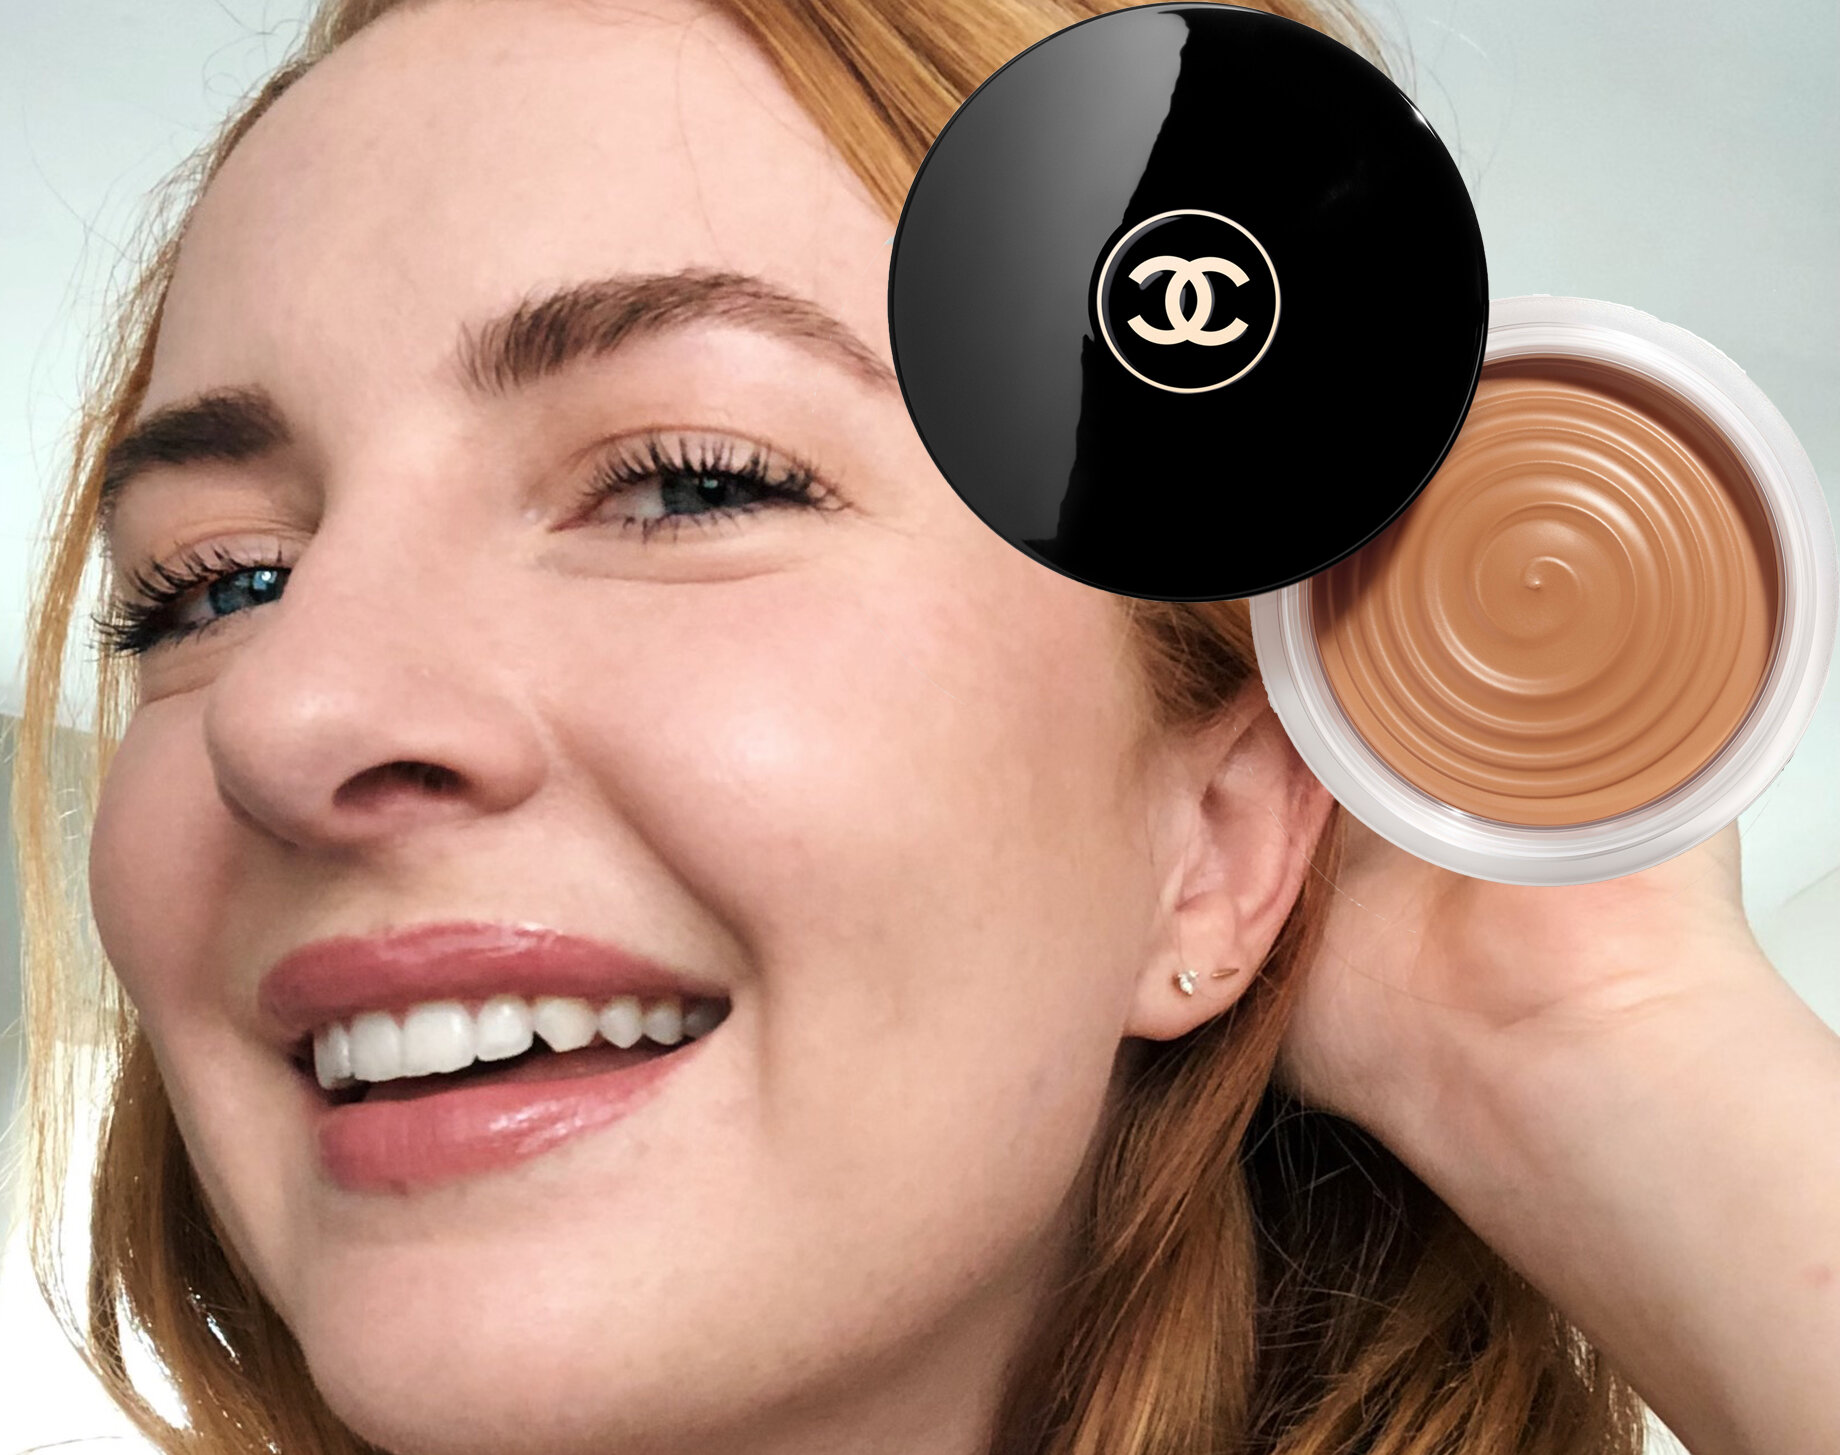 Honest review of the Chanel LES BEIGES Healthy Glow Bronzing Cream